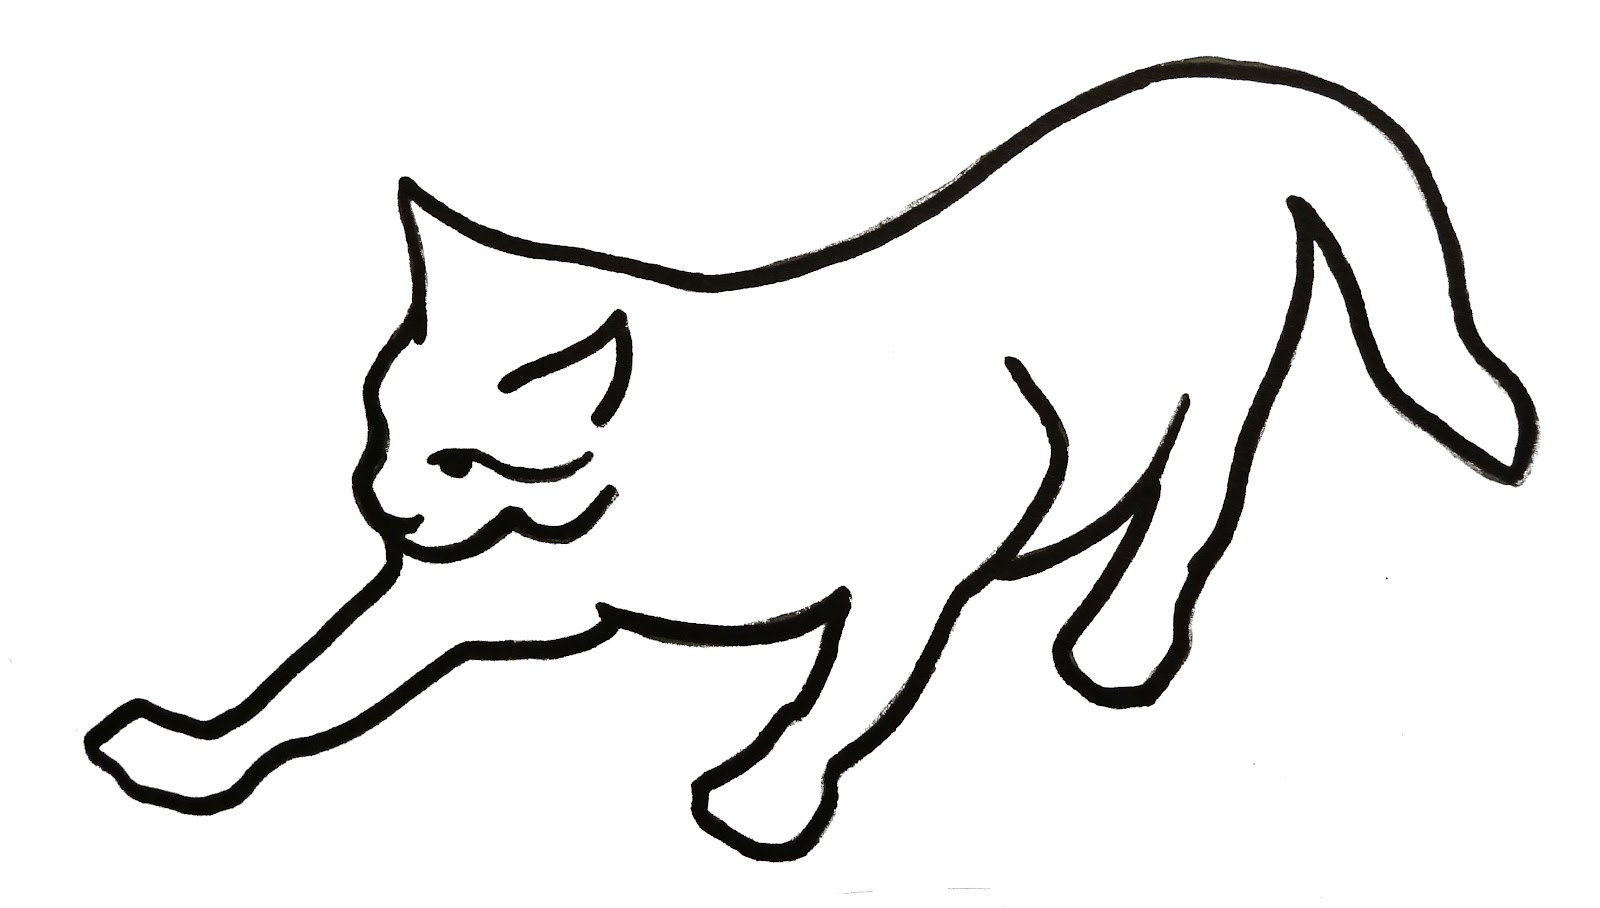 Cat Line Drawing - ClipArt Best